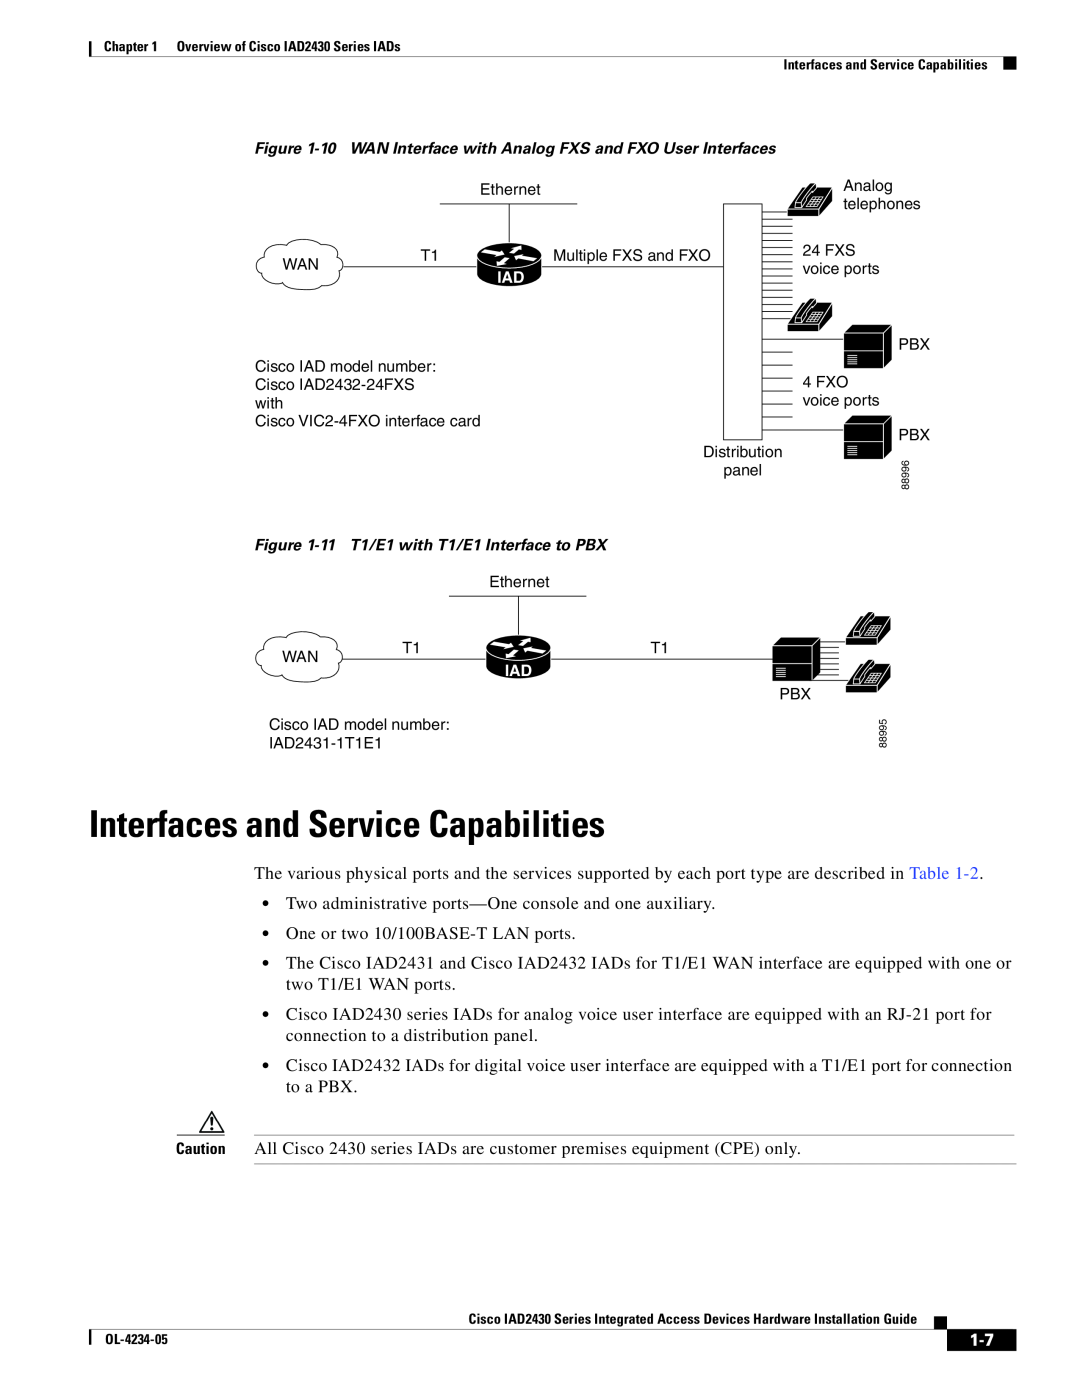 Cisco Systems IAD2430 Series specifications Interfaces and Service Capabilities 